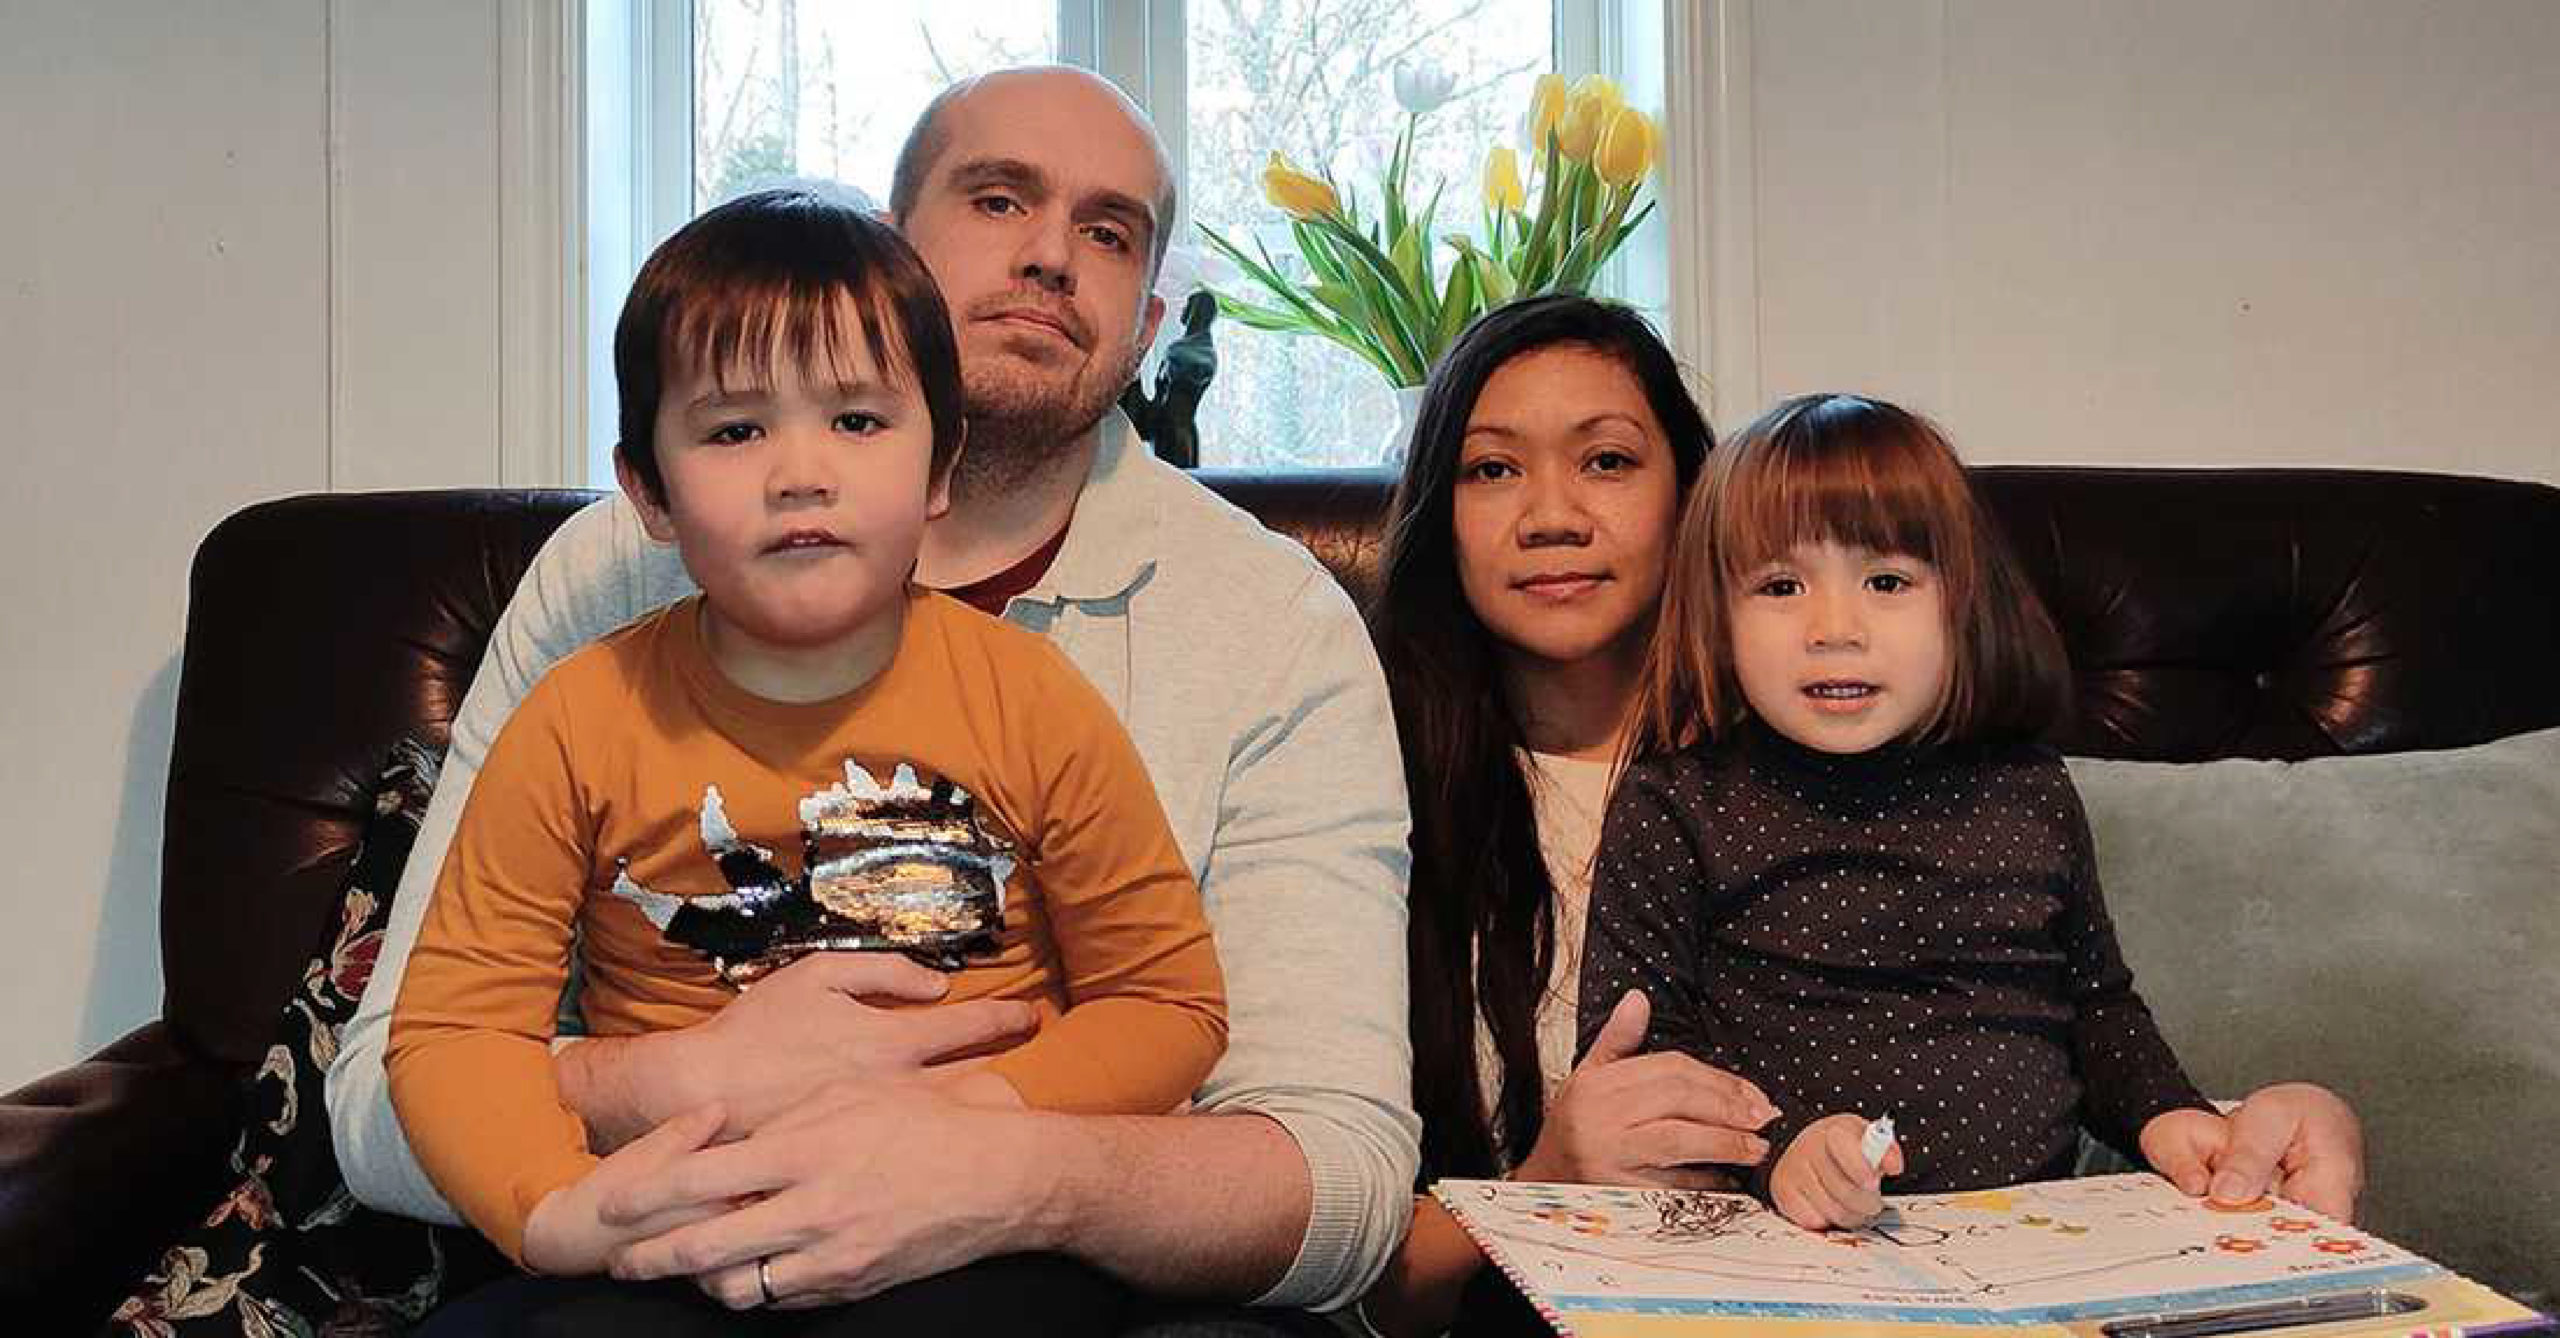 Sweden to deport Filipina despite five years of marriage and two small children